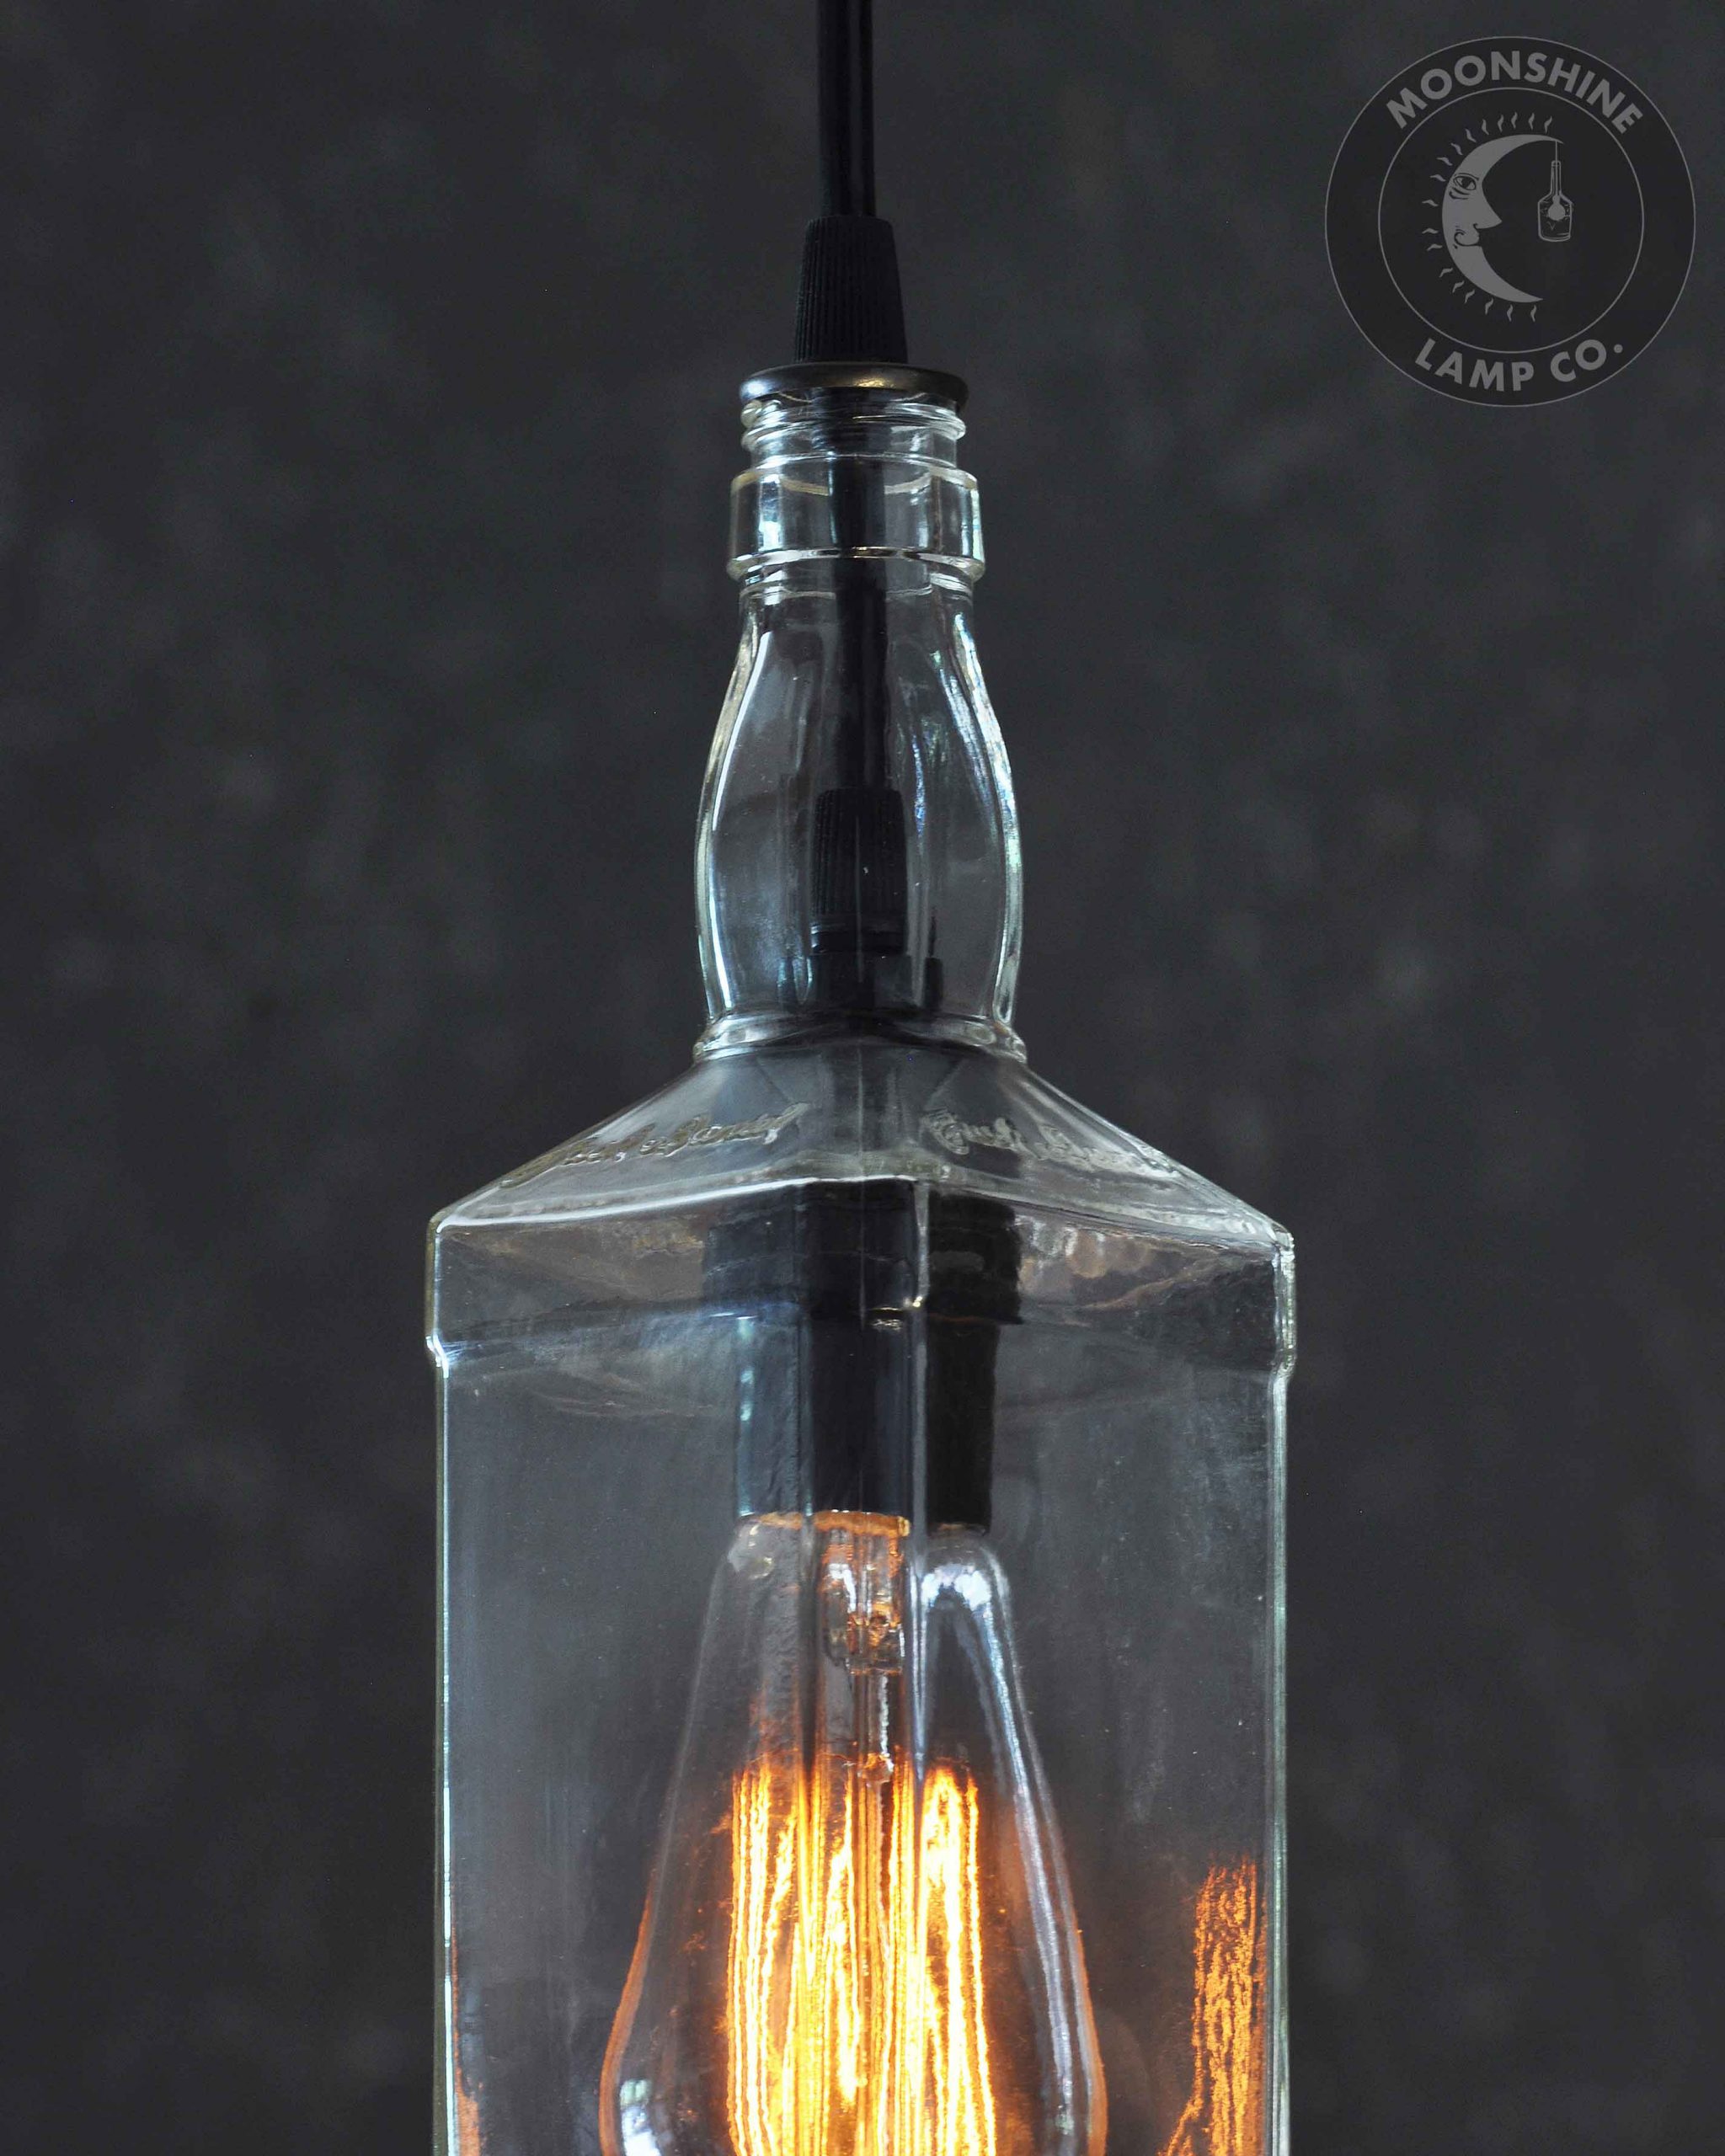 Enhance your space when you order this handmade scotch bottle lamp from Moo...